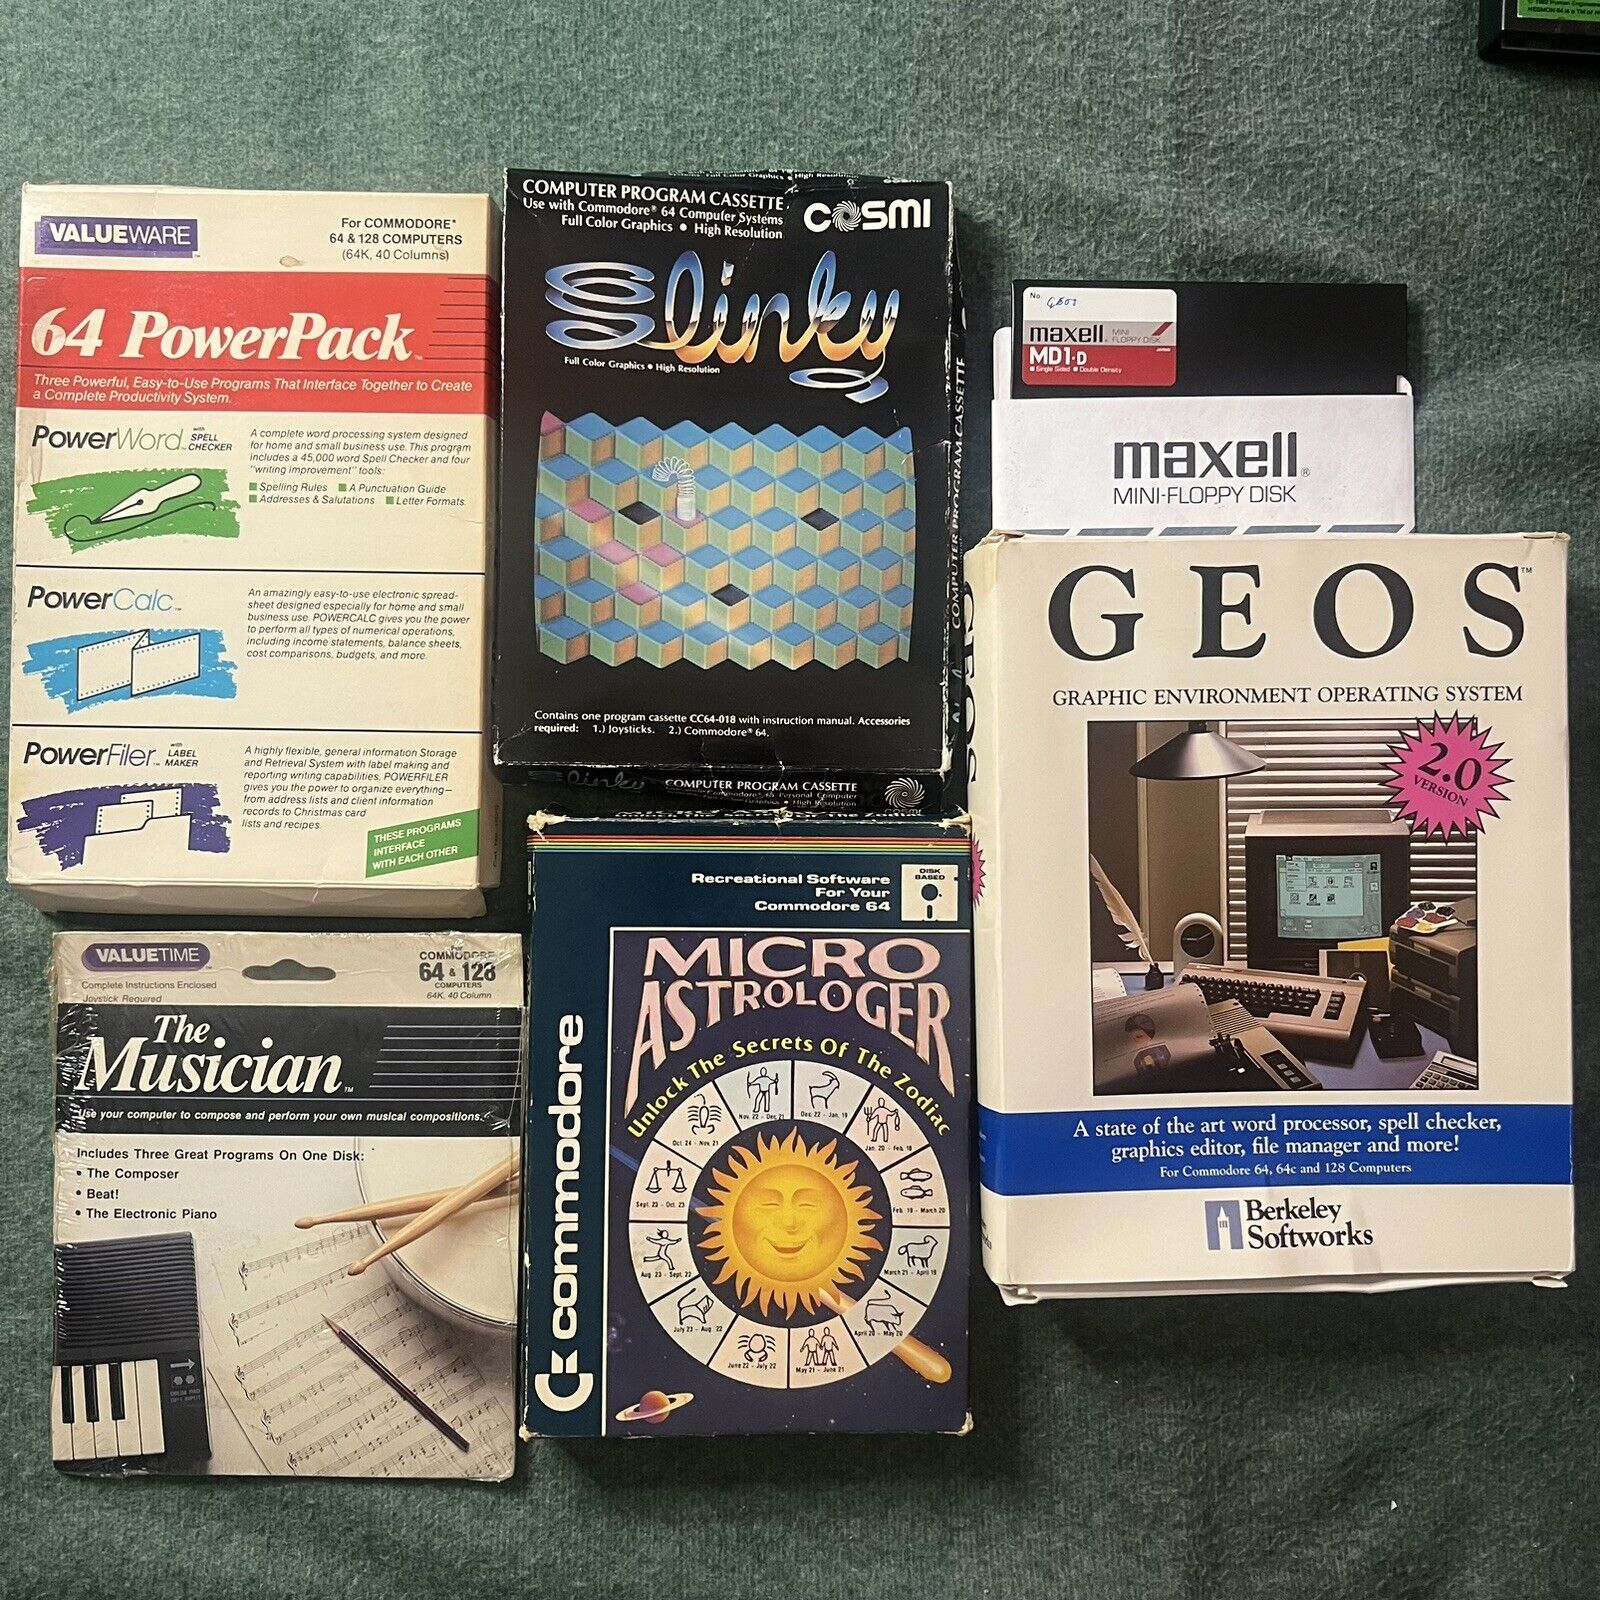 Commodore 64 Lot Slinky Geos Micro Astrologer Power Pack Musician (untested)